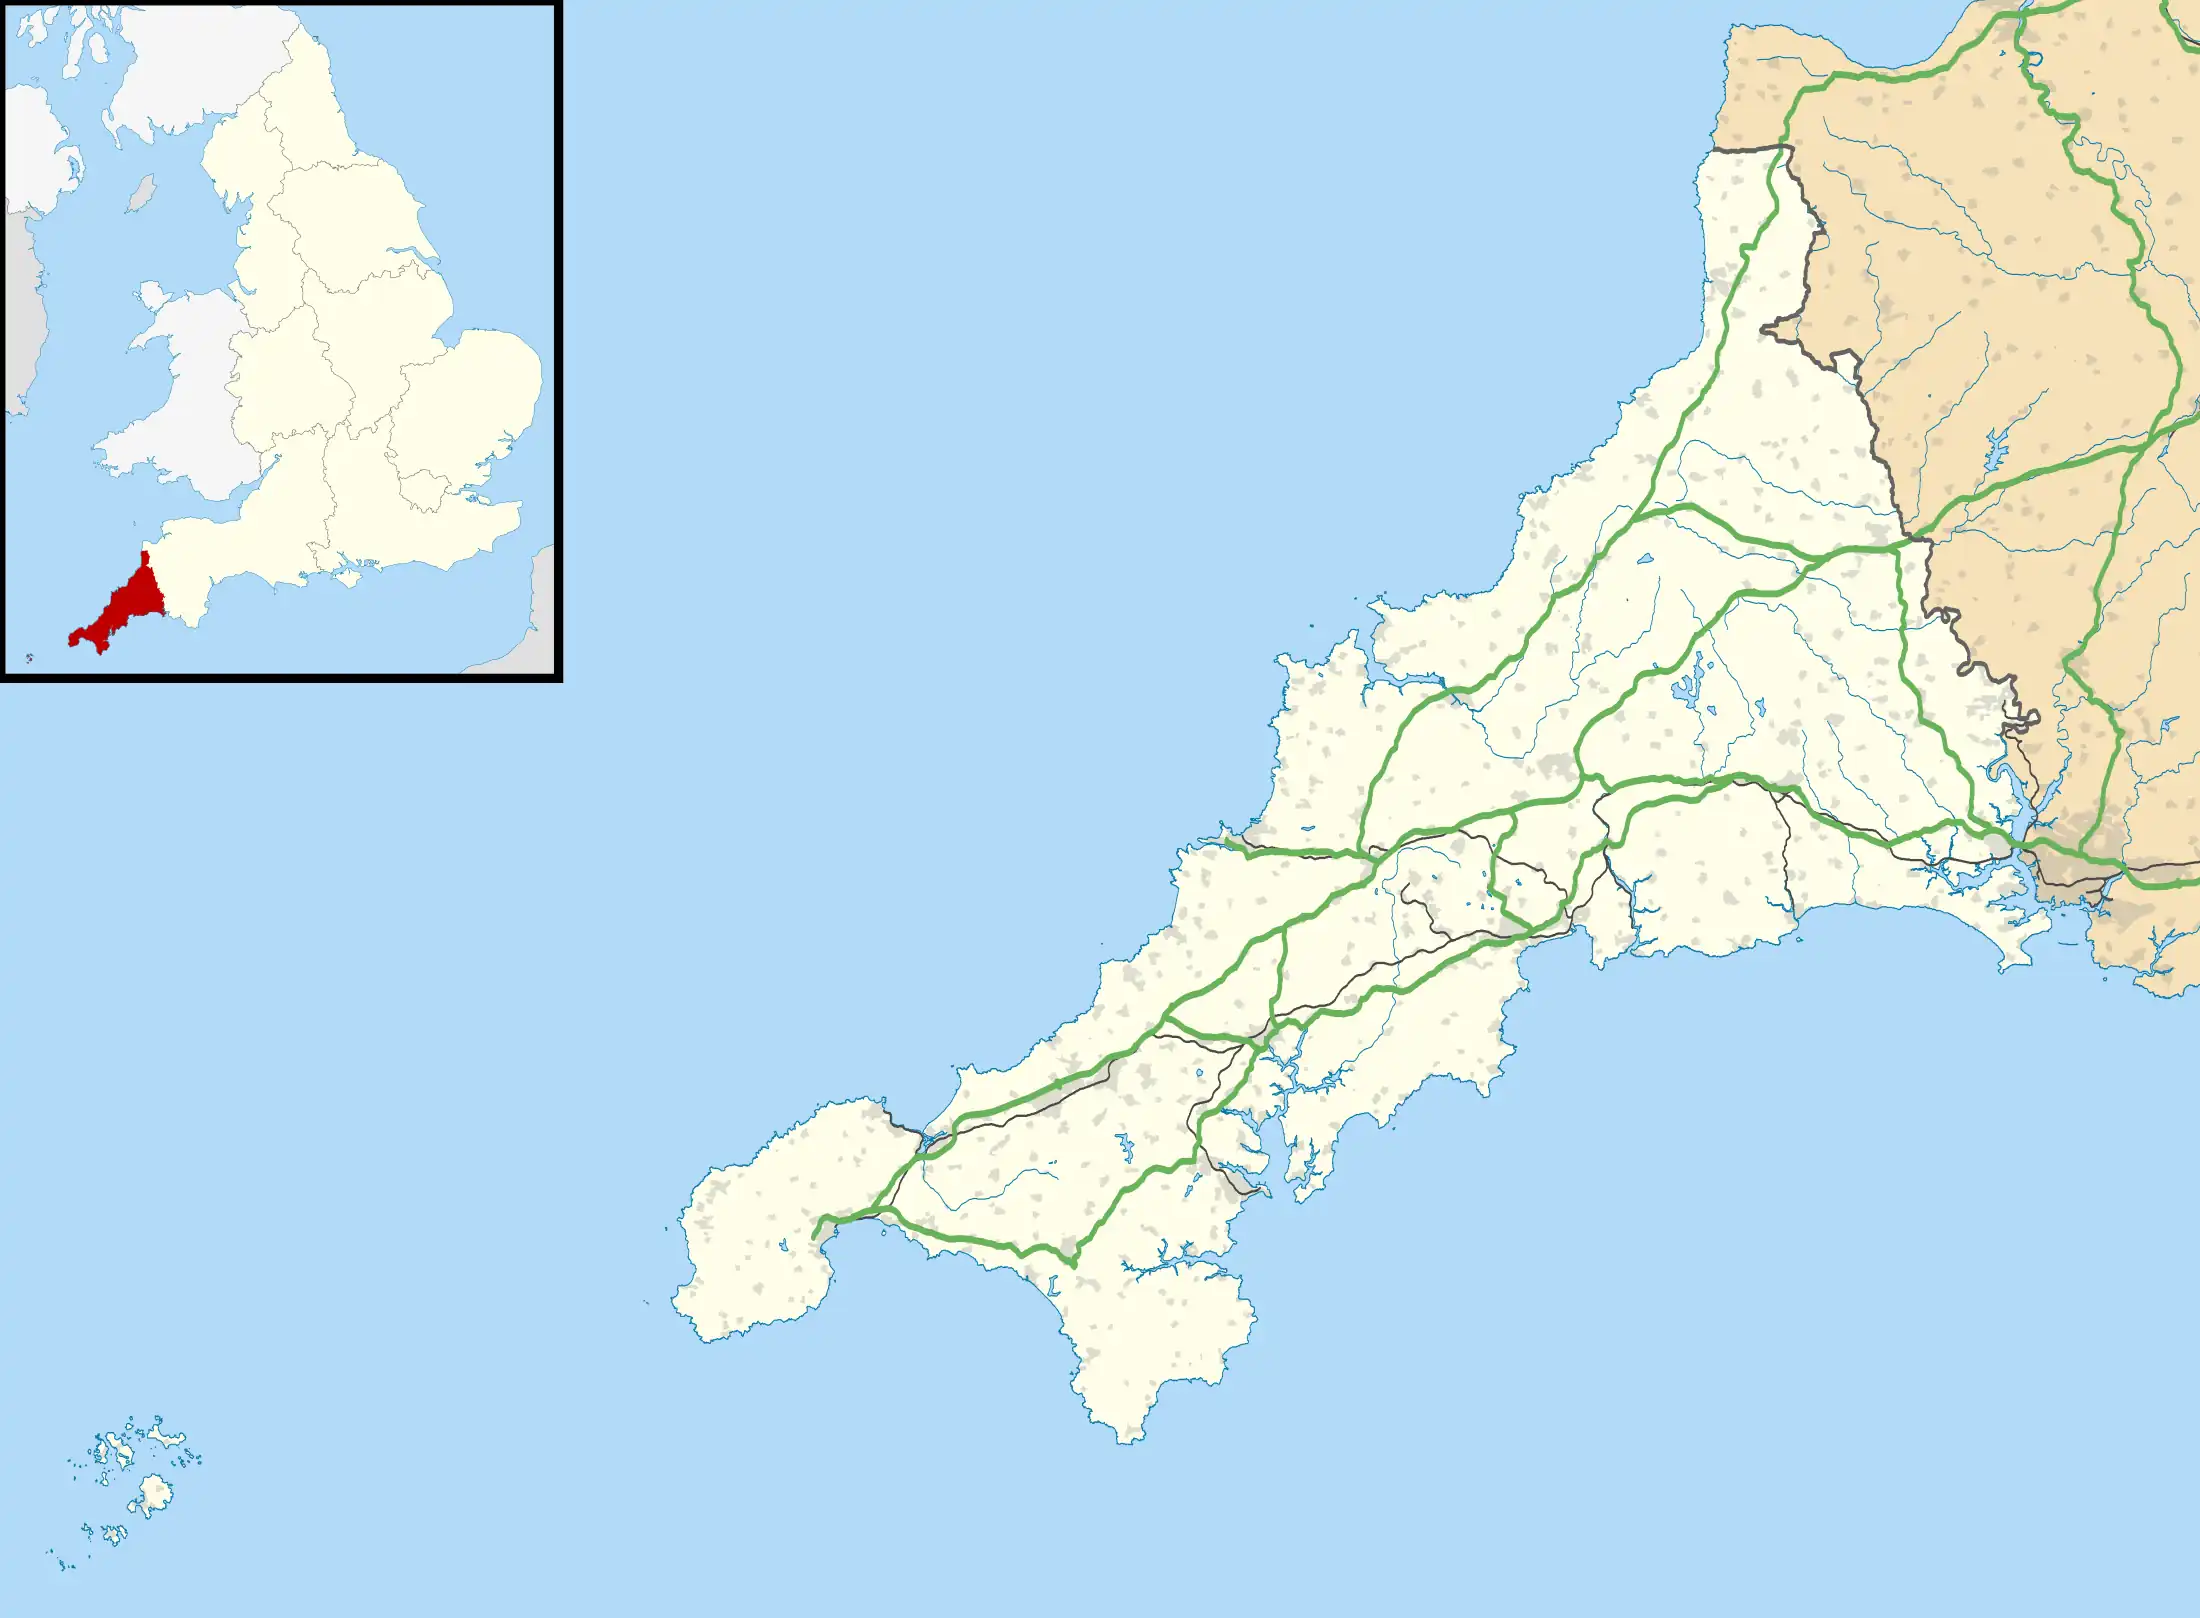 The Brisons is located in Cornwall